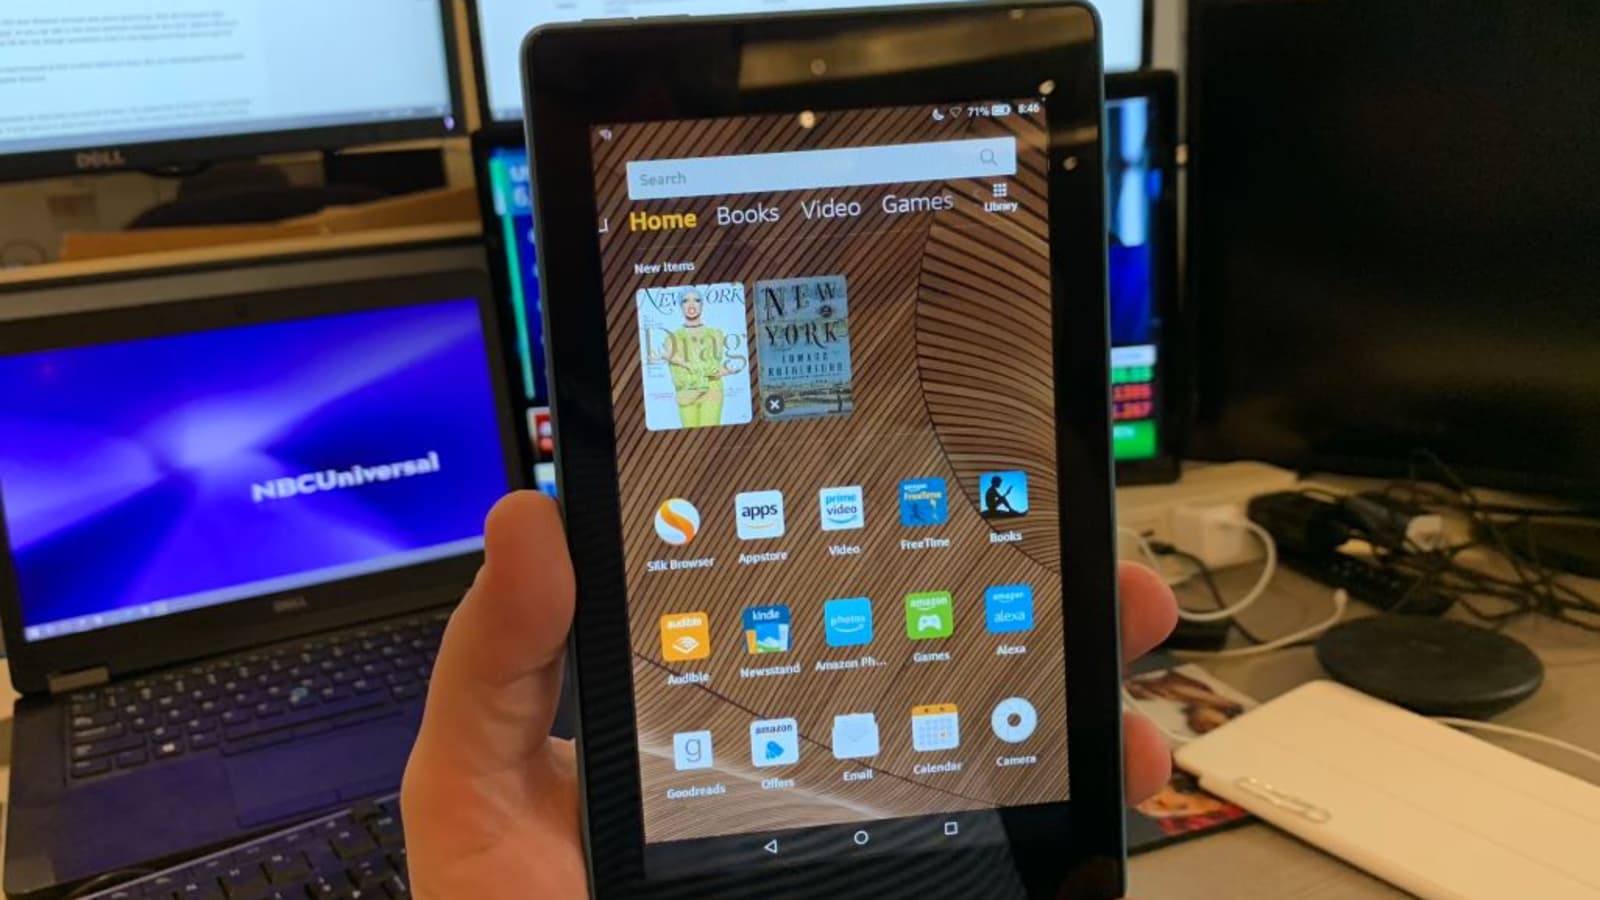 Amazon Fire 7 2019 Tablet Review Skip It Buy Fire Hd8 Instead - 7 best roblox images amazon mobile game app app